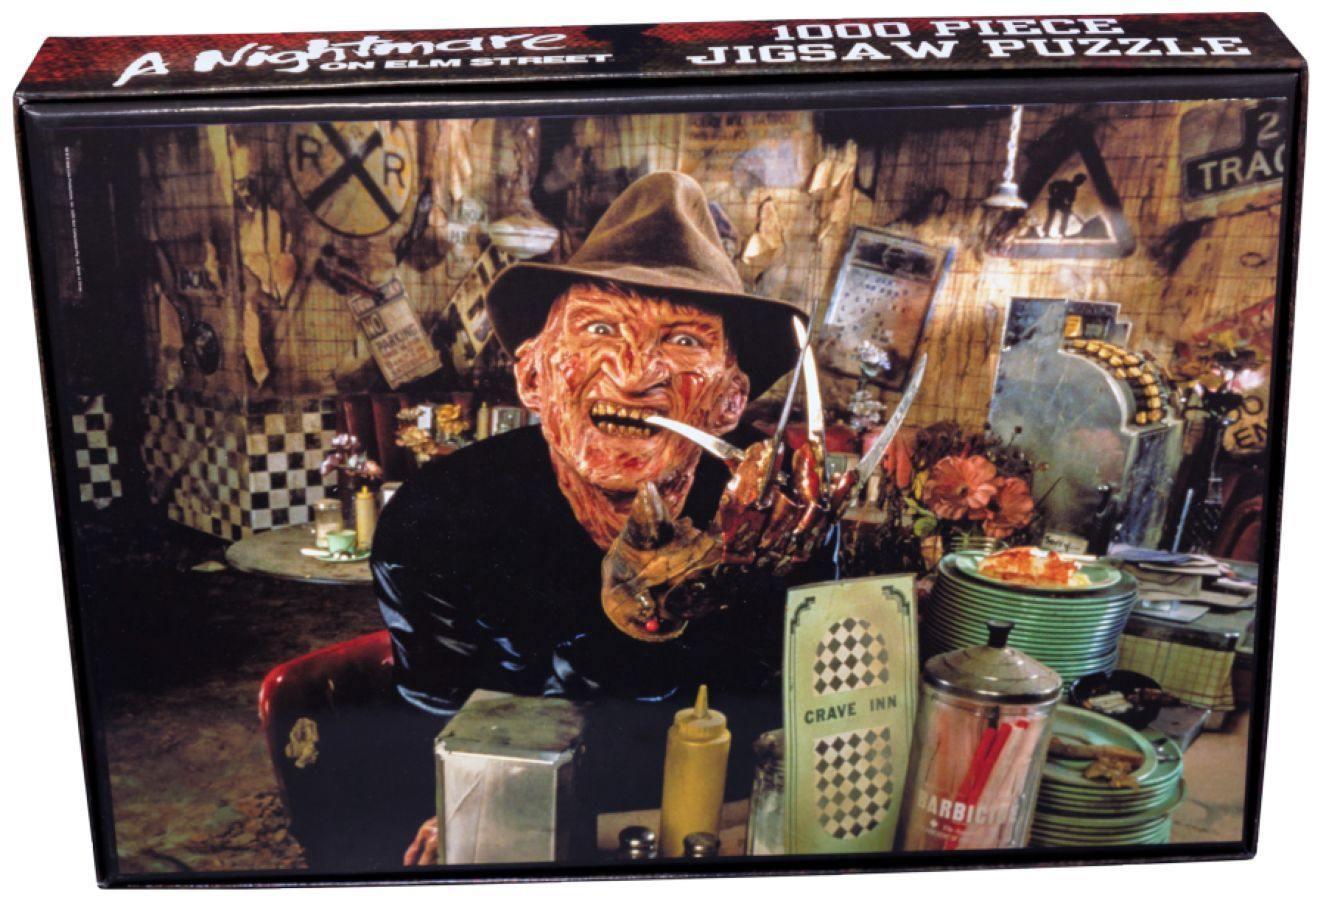 IKO1706 A Nightmare on Elm Street - Freddy Krueger at the Diner 1000 piece Jigsaw Puzzle - Ikon Collectables - Titan Pop Culture